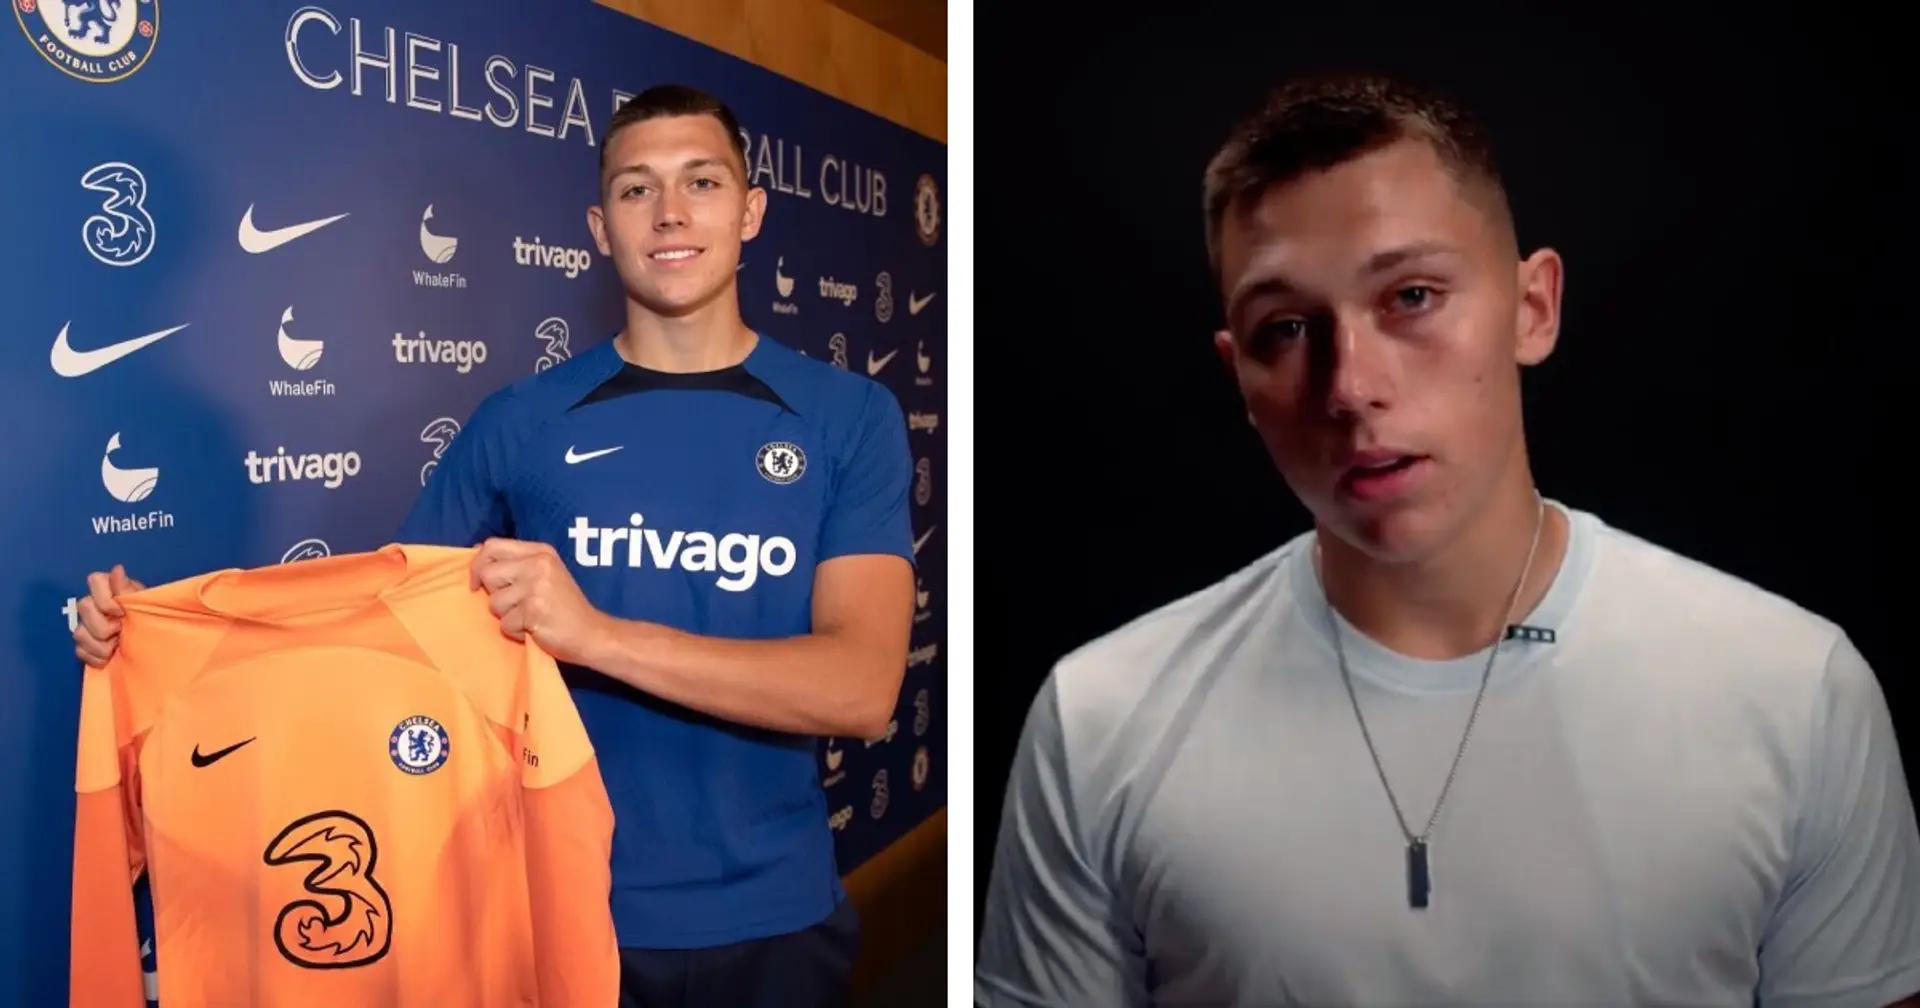 'It's clear why we are the best team in London': New signing Slonina on Chelsea move (video)